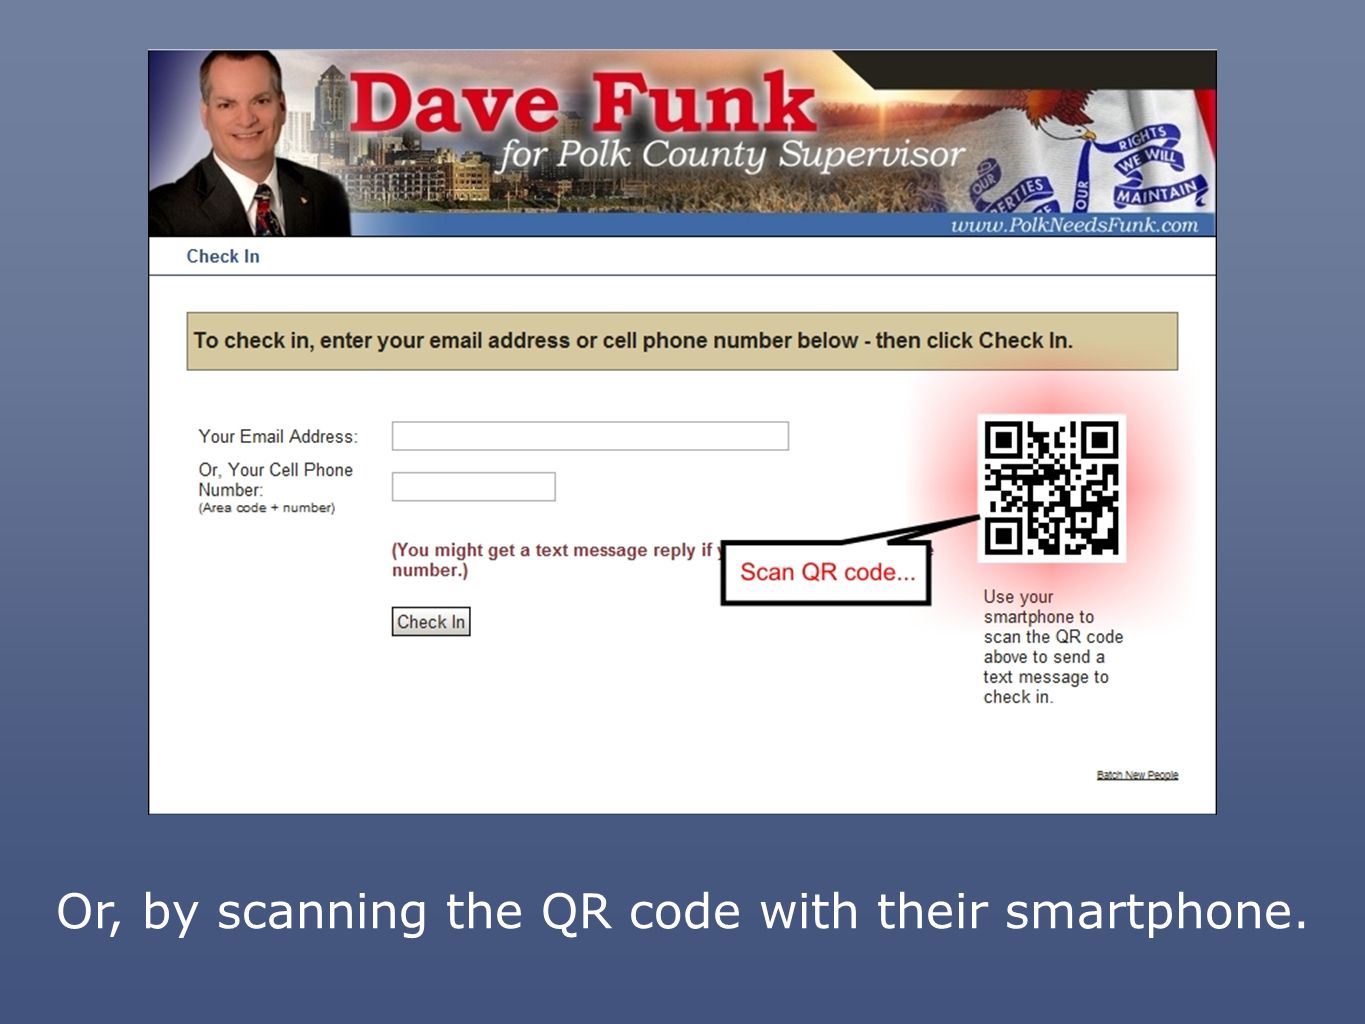 Or, by scanning the QR code with their smartphone.